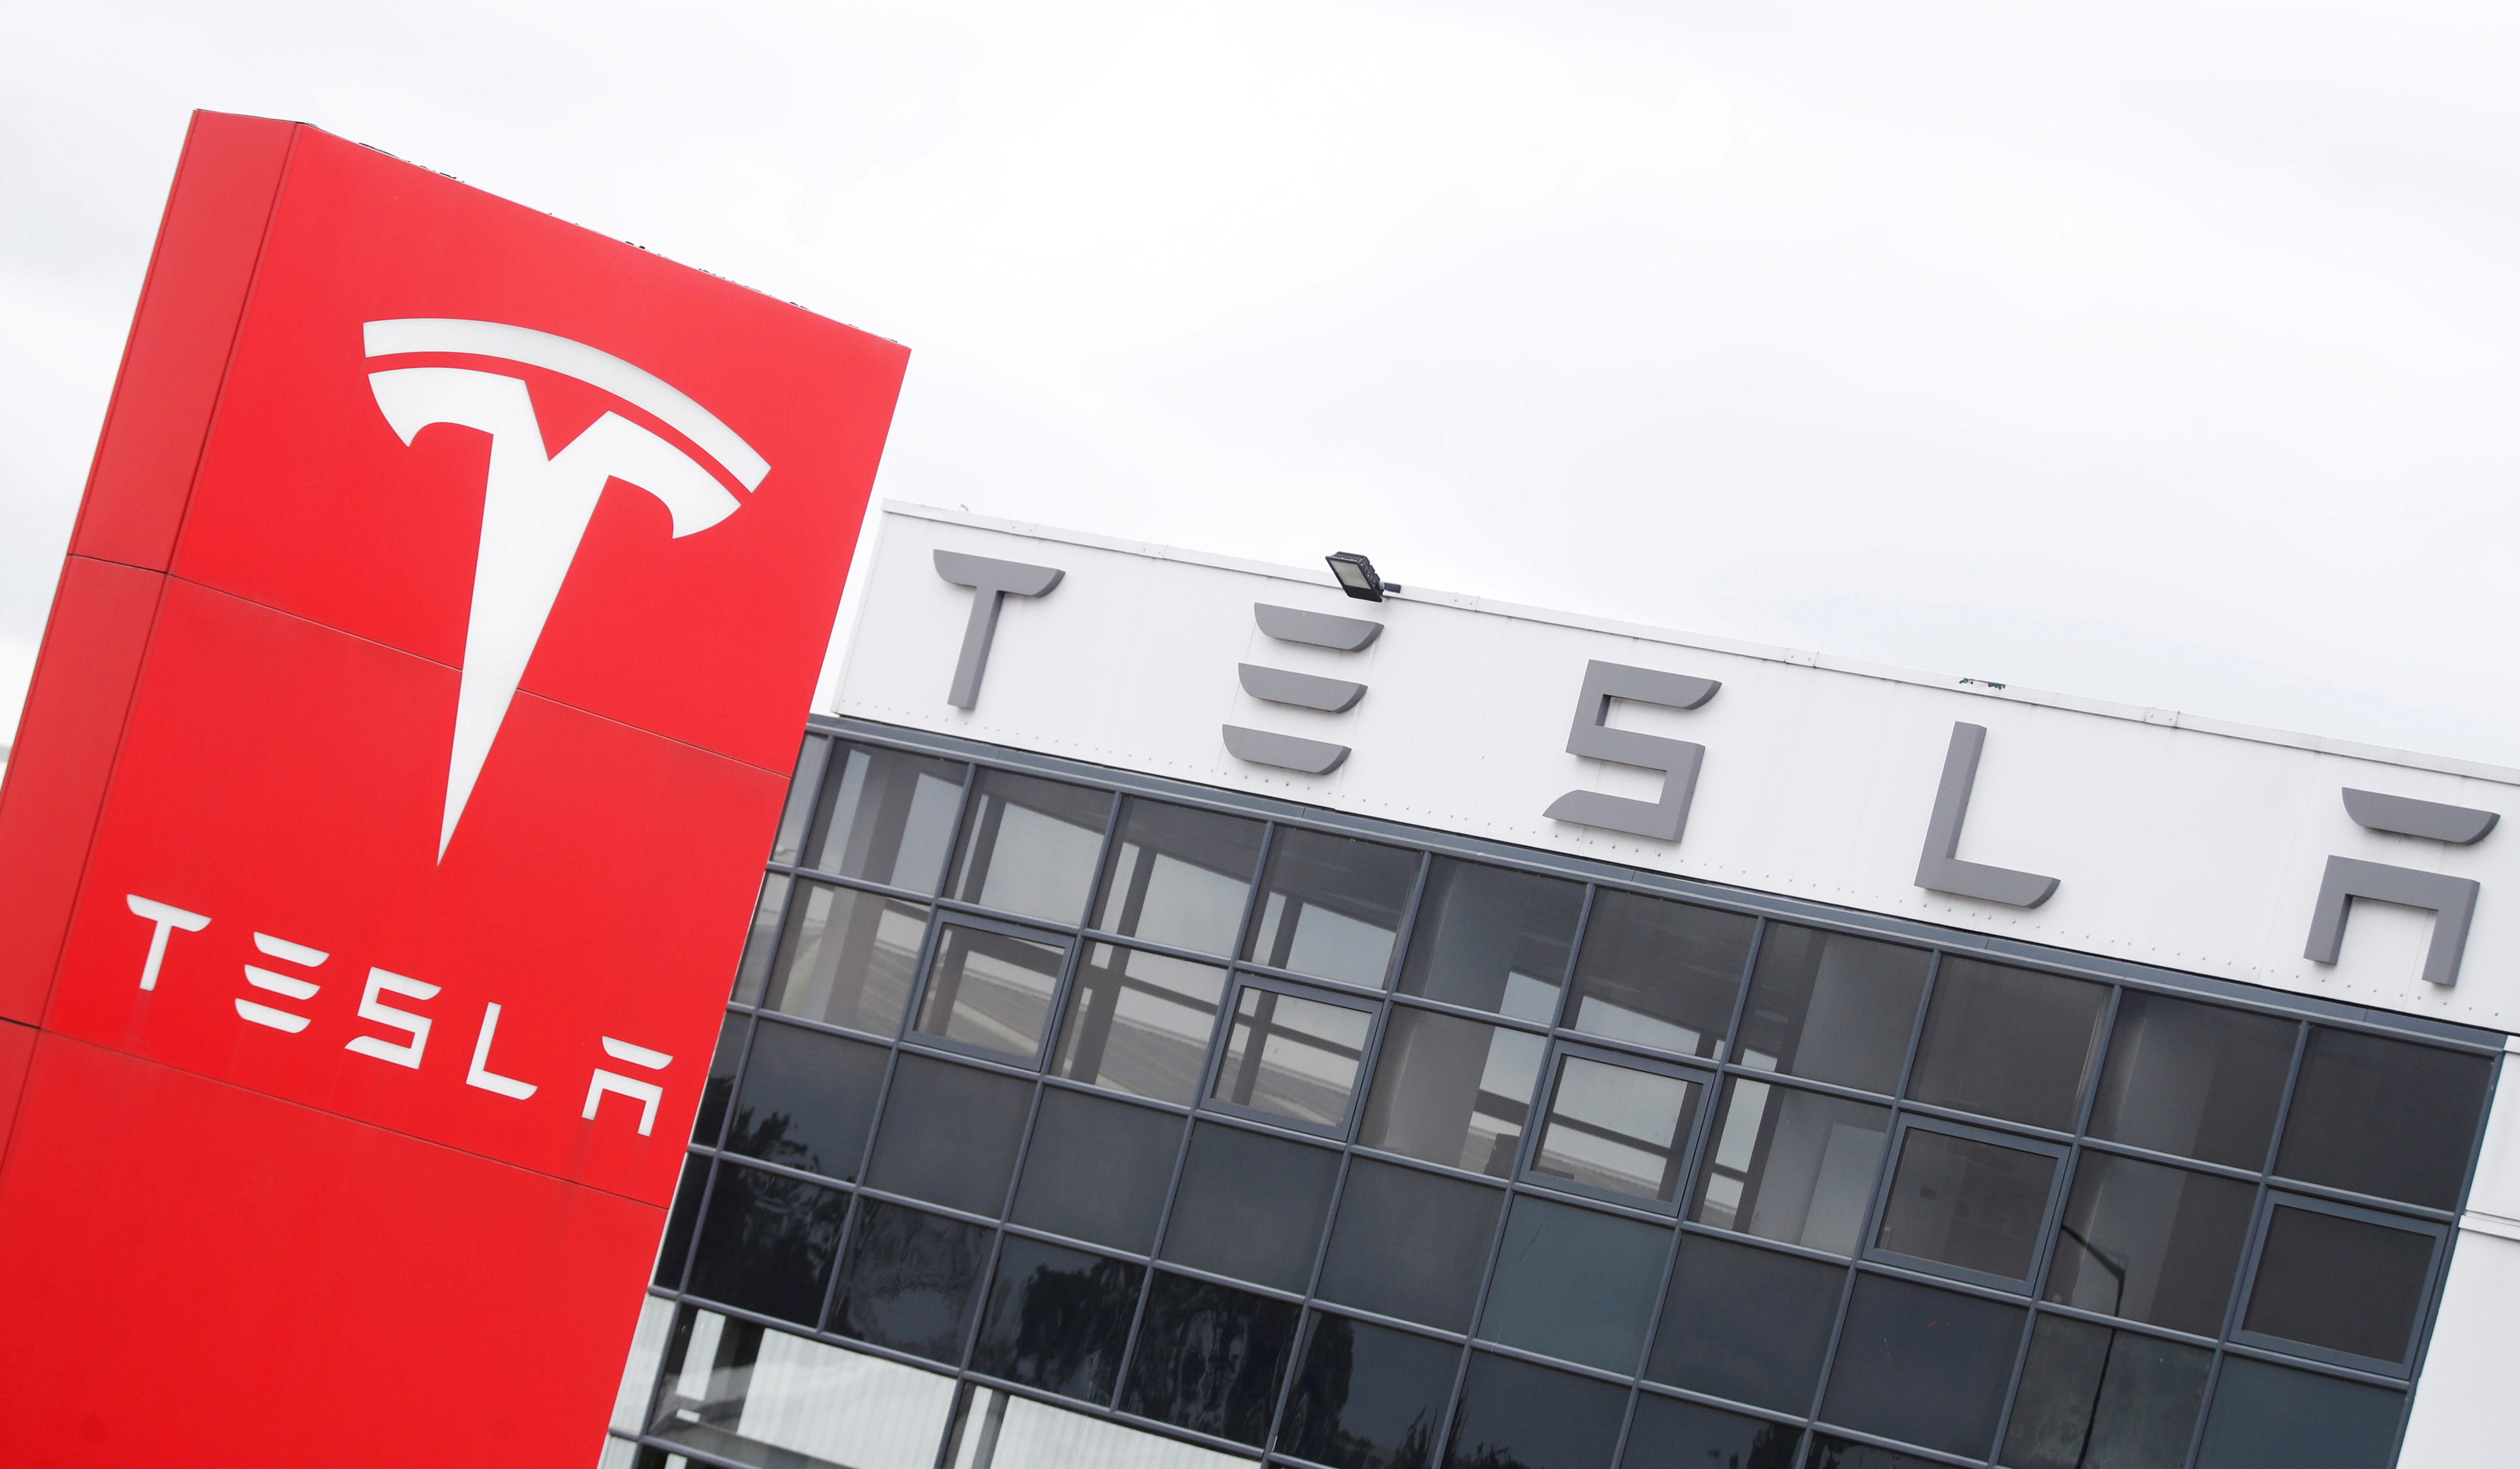 The logo of car manufacturer Tesla is seen at a dealership in London, Britain, May 14, 2021. REUTERS/Matthew Childs/File Photo